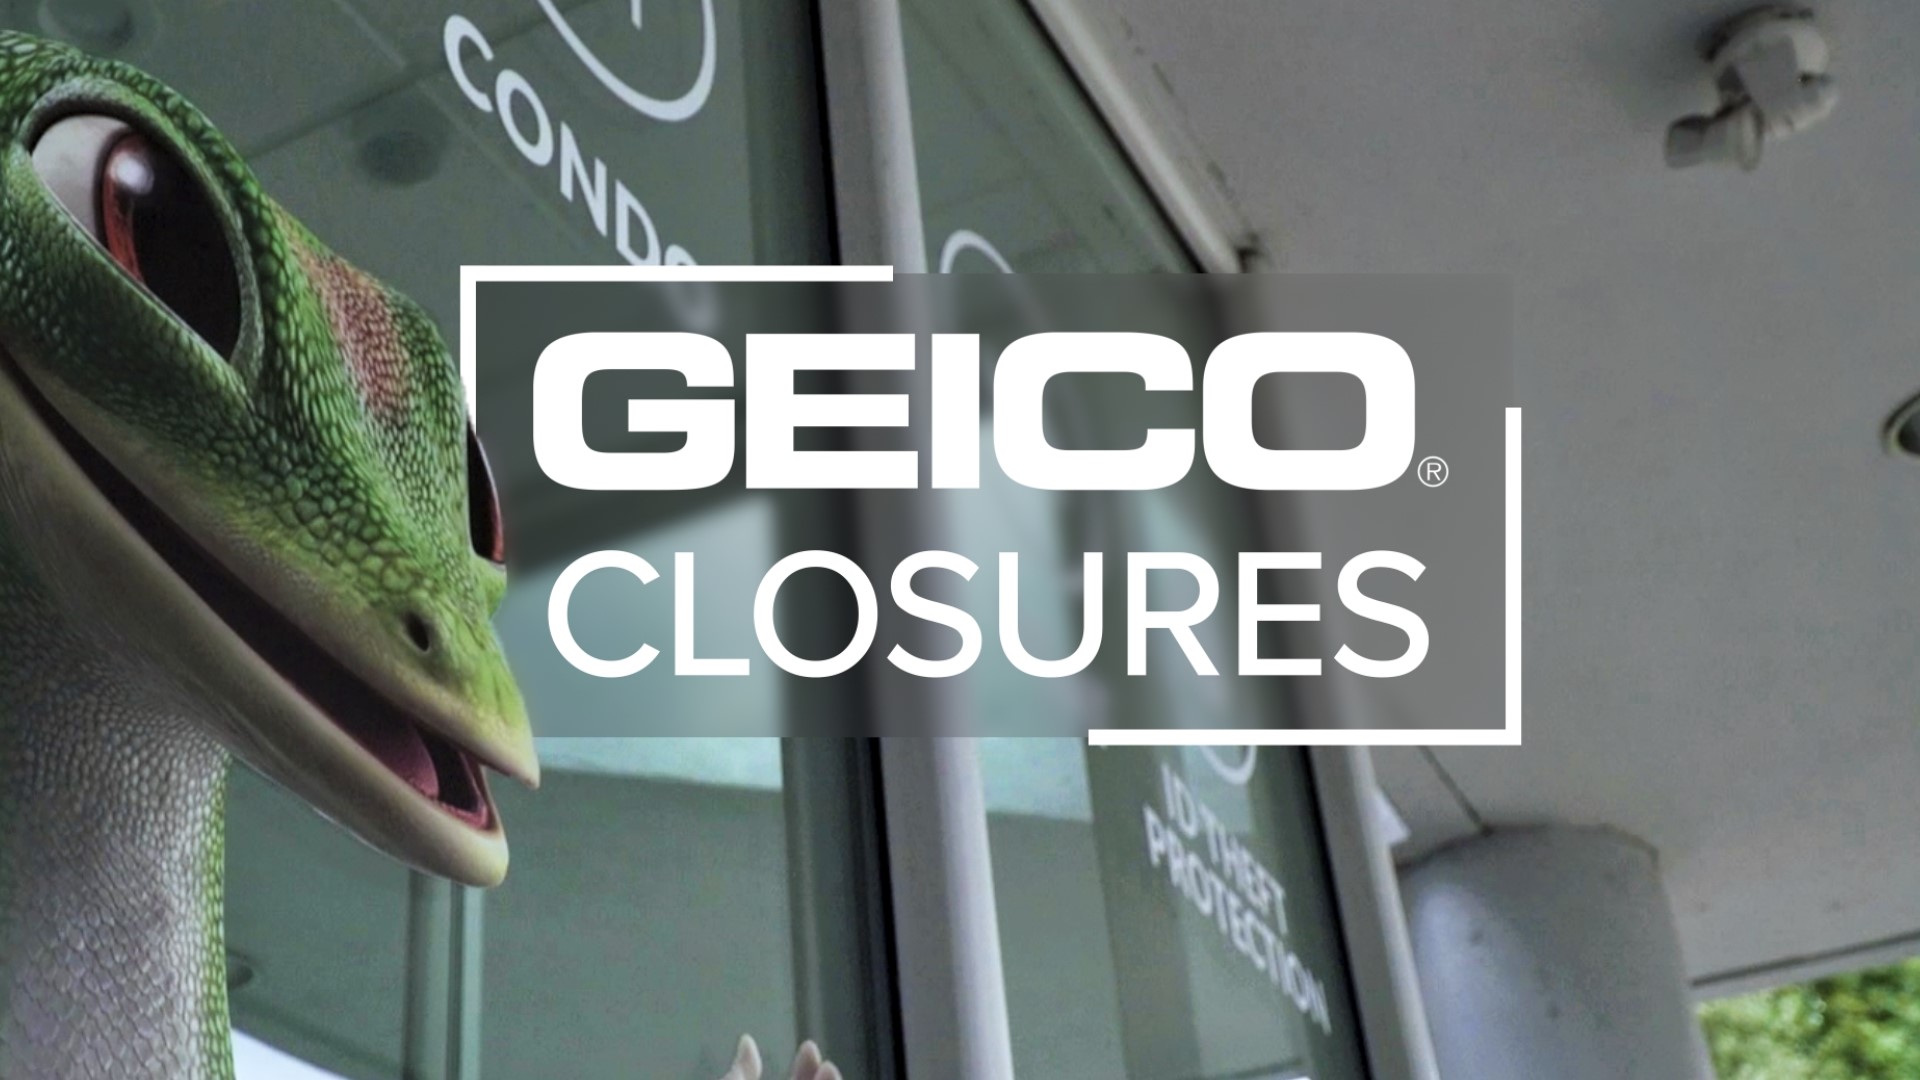 According to the California Department of Insurance, GEICO closed all of its brick and mortar stores and continues to sell insurance policies online